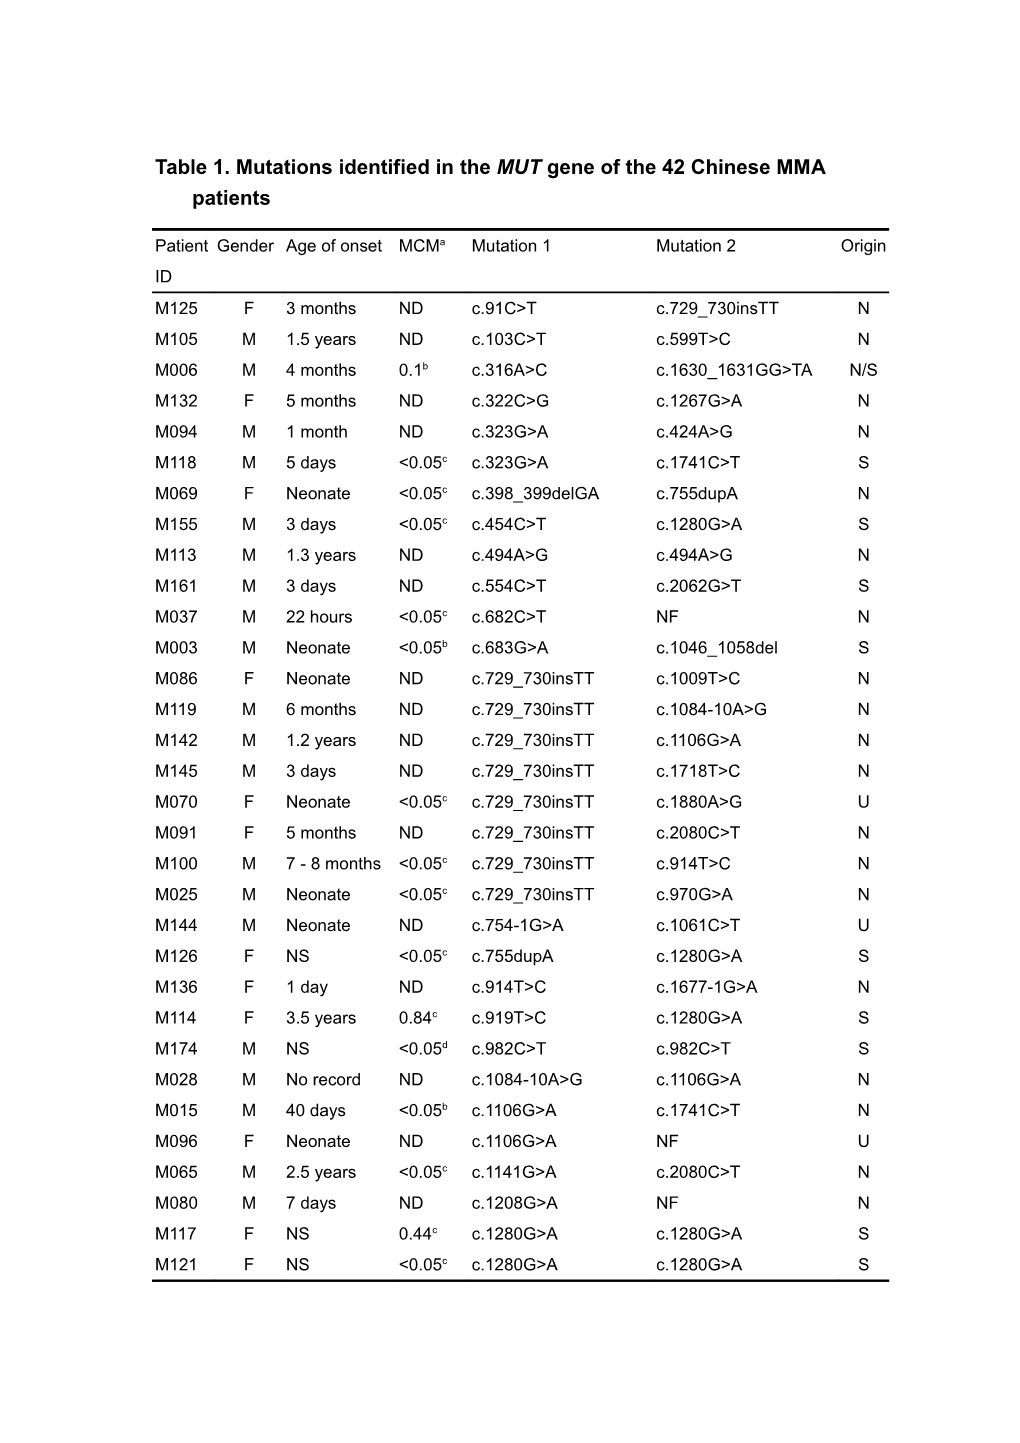 Table 1. Mutations Identified in the MUT Gene of the 42 Chinese MMA Patients